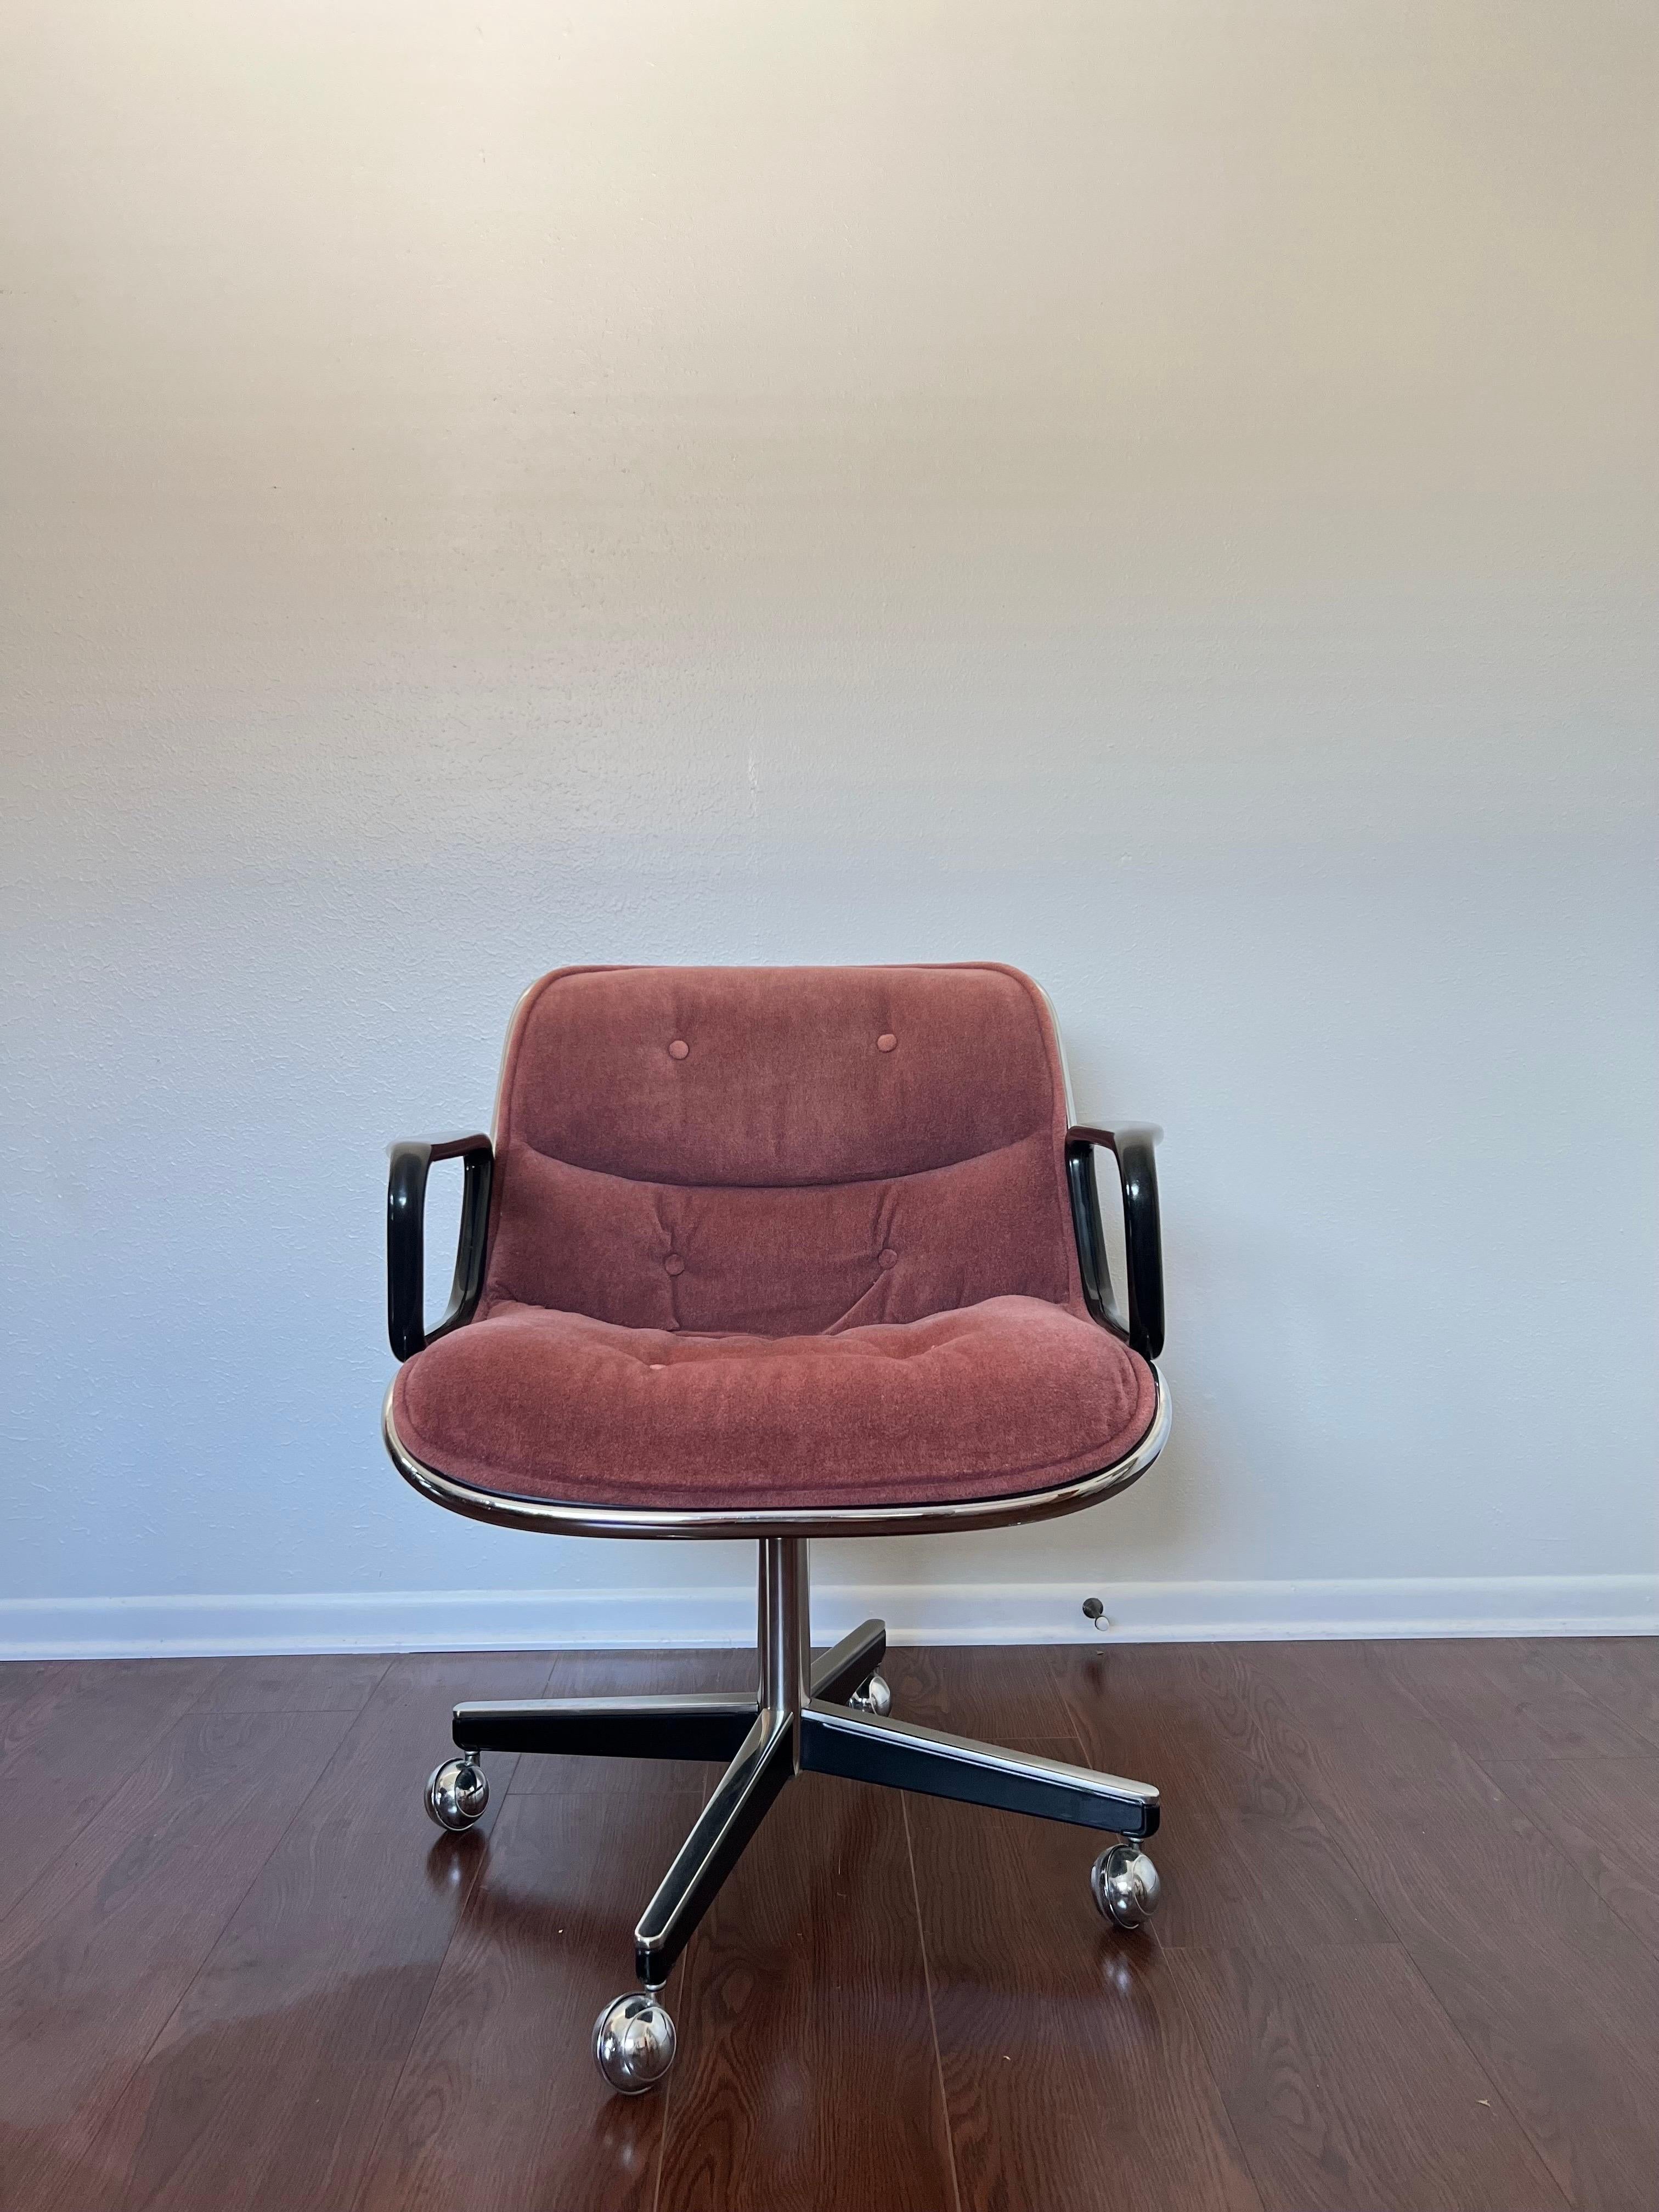 Classic Executive Chair Designed by Charles Pollock for Knoll in Pink 1